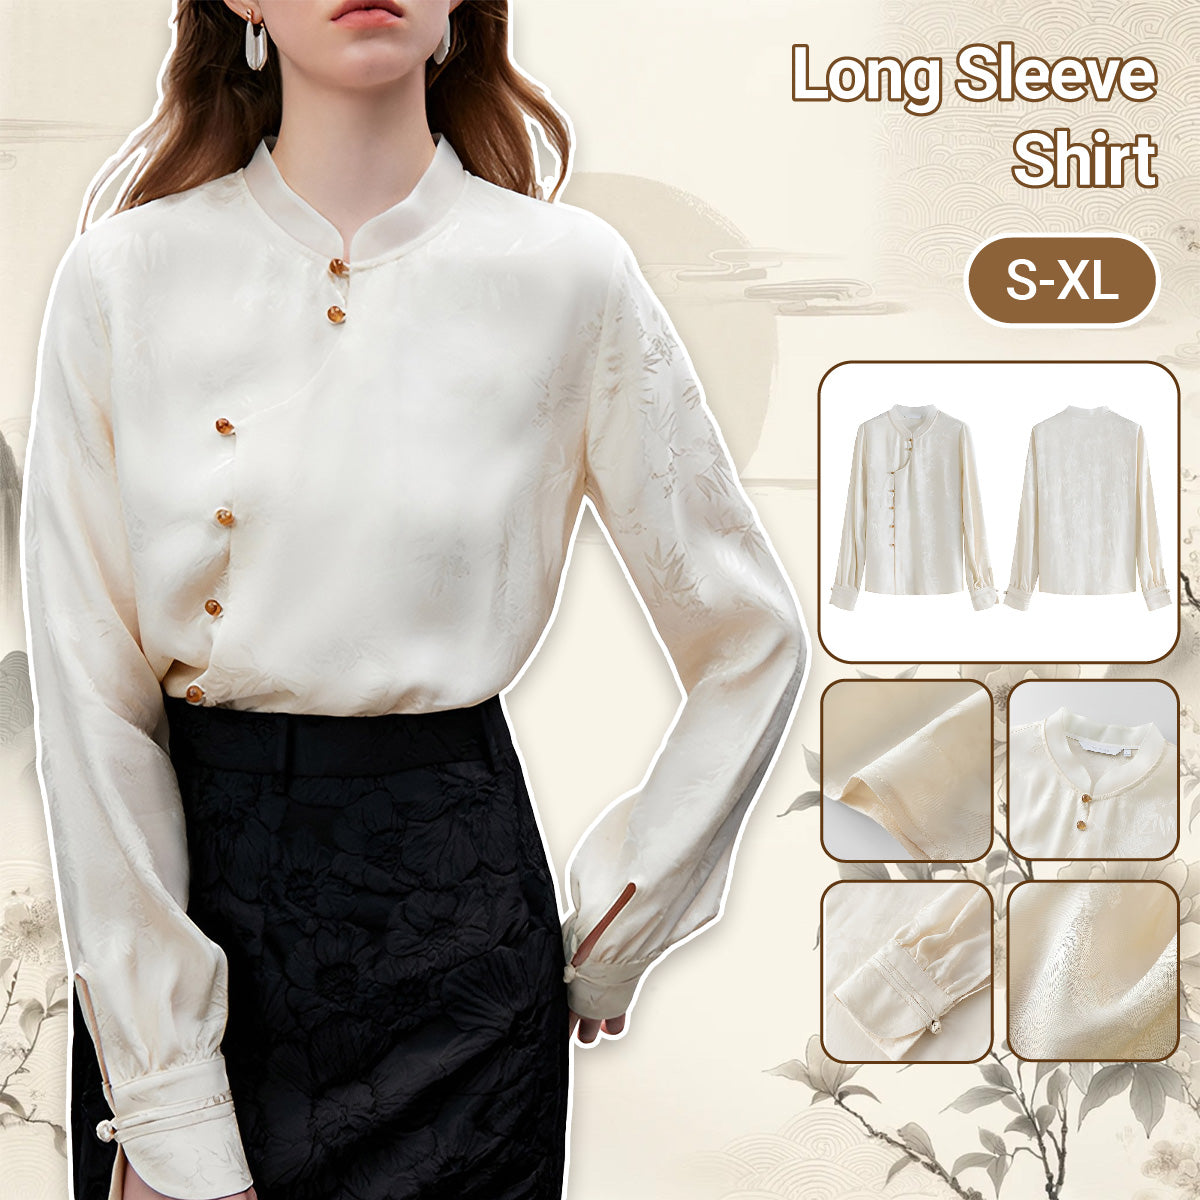 Long sleeve mandarin collar shirt for women in ivory with subtle floral patterns